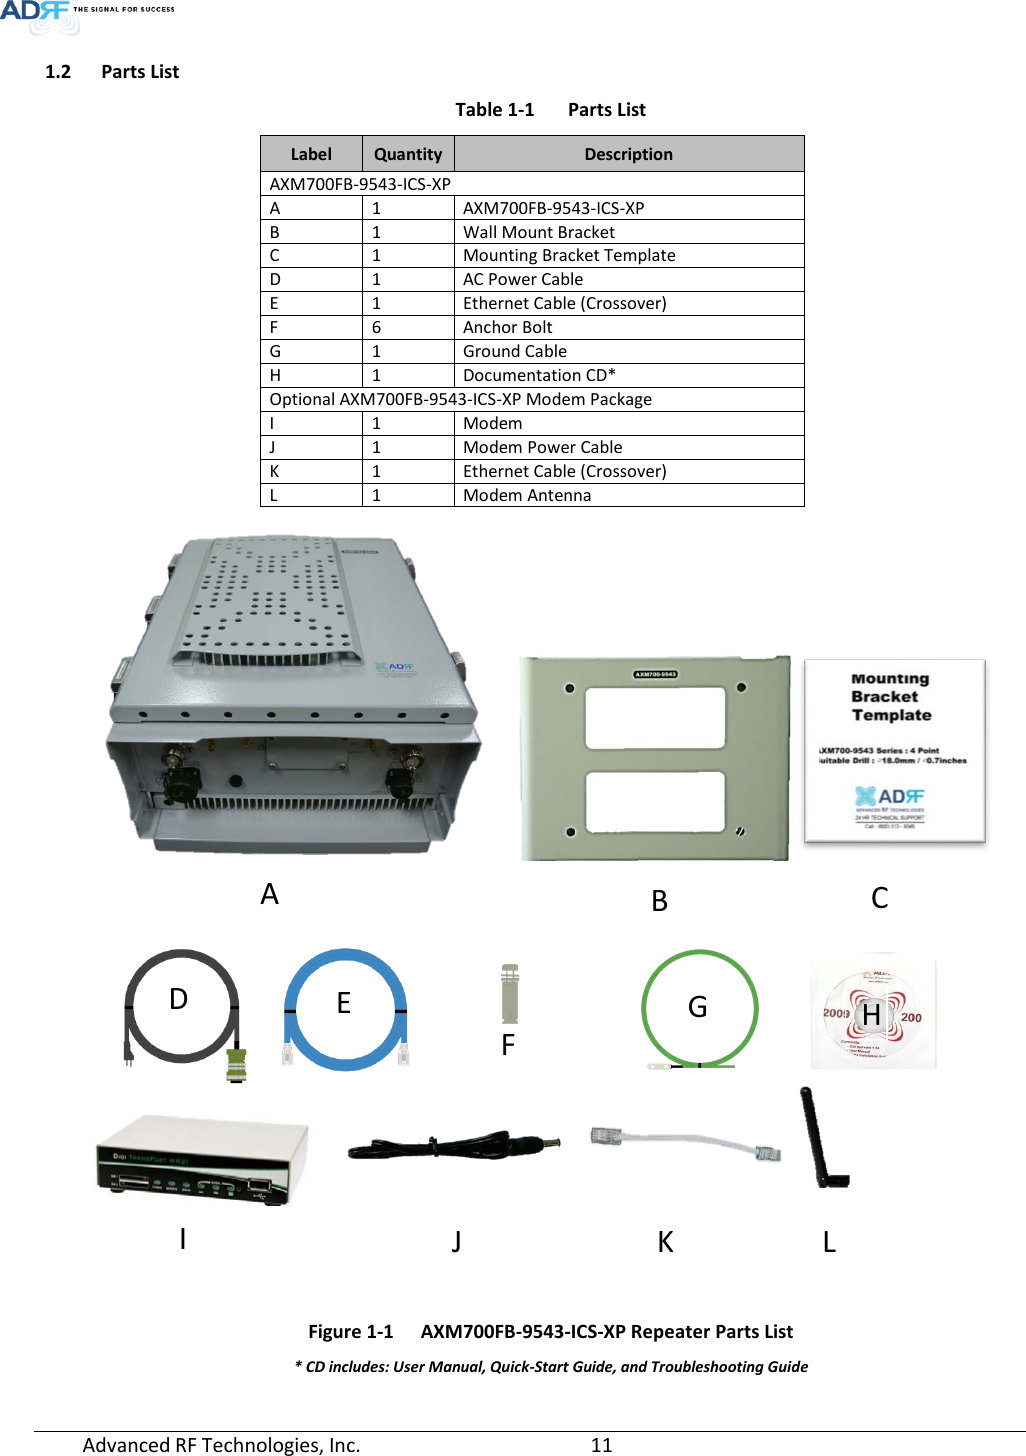  Advanced RF Technologies, Inc.       11   1.2 Parts List Table 1-1  Parts List Label  Quantity  Description AXM700FB-9543-ICS-XP A 1 AXM700FB-9543-ICS-XP B 1 Wall Mount Bracket C 1 Mounting Bracket Template D 1 AC Power Cable E 1 Ethernet Cable (Crossover) F 6 Anchor Bolt G 1 Ground Cable H 1 Documentation CD* Optional AXM700FB-9543-ICS-XP Modem Package I 1 Modem J 1 Modem Power Cable K 1 Ethernet Cable (Crossover) L 1 Modem Antenna                                       Figure 1-1  AXM700FB-9543-ICS-XP Repeater Parts List * CD includes: User Manual, Quick-Start Guide, and Troubleshooting Guide D E F B G H A I J K L C 